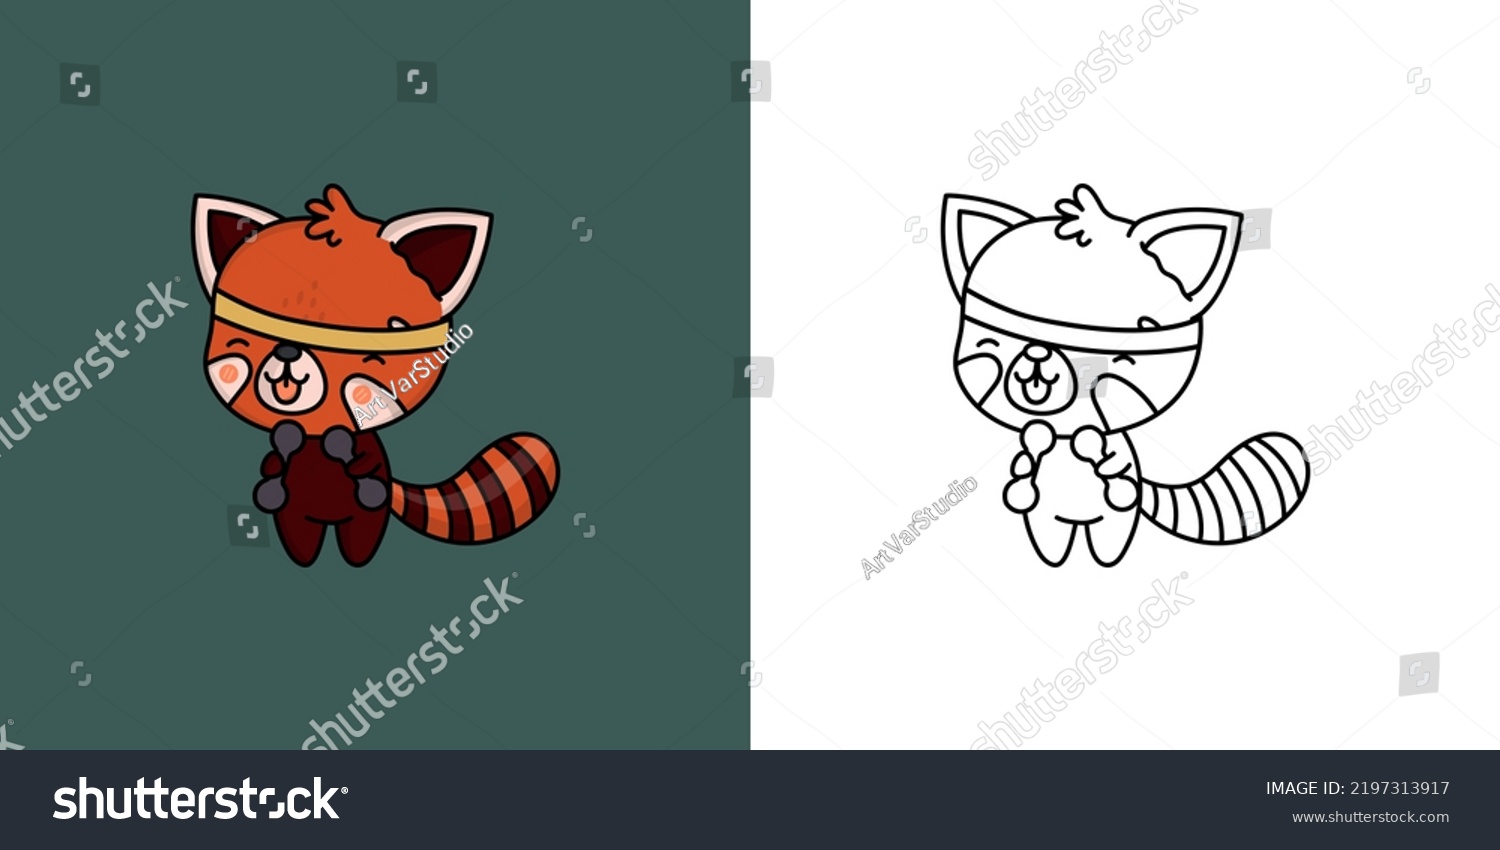 SVG of Clipart Red Panda Athlete Multicolored and Black and White. Cute Animal Sportsman. Vector Illustration of a Kawaii Animal for Stickers, Baby Shower, Coloring Pages, Prints for Clothes.
 svg